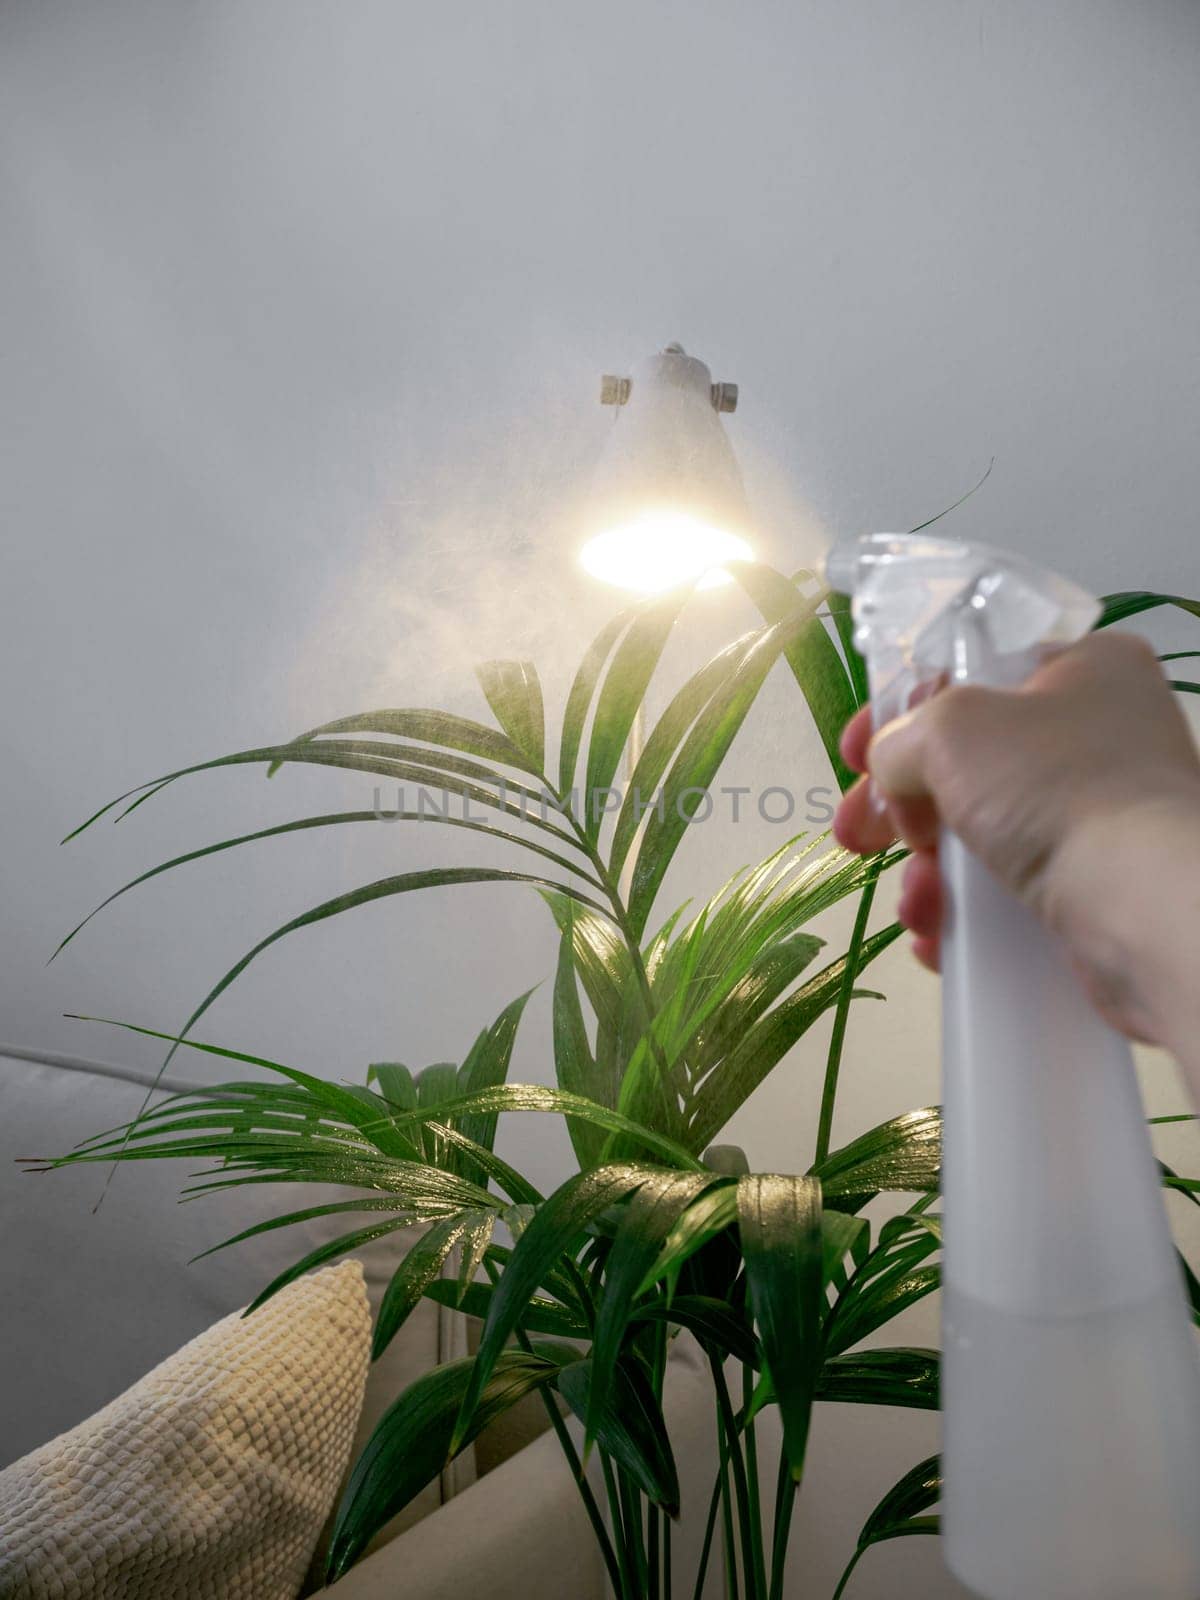 POV of plant care spraying. Female hand spraying plant with water spray bottle while taking care of her kentia palm houseplant. Kentia palm in house interior. Urban jingle and plant care concept